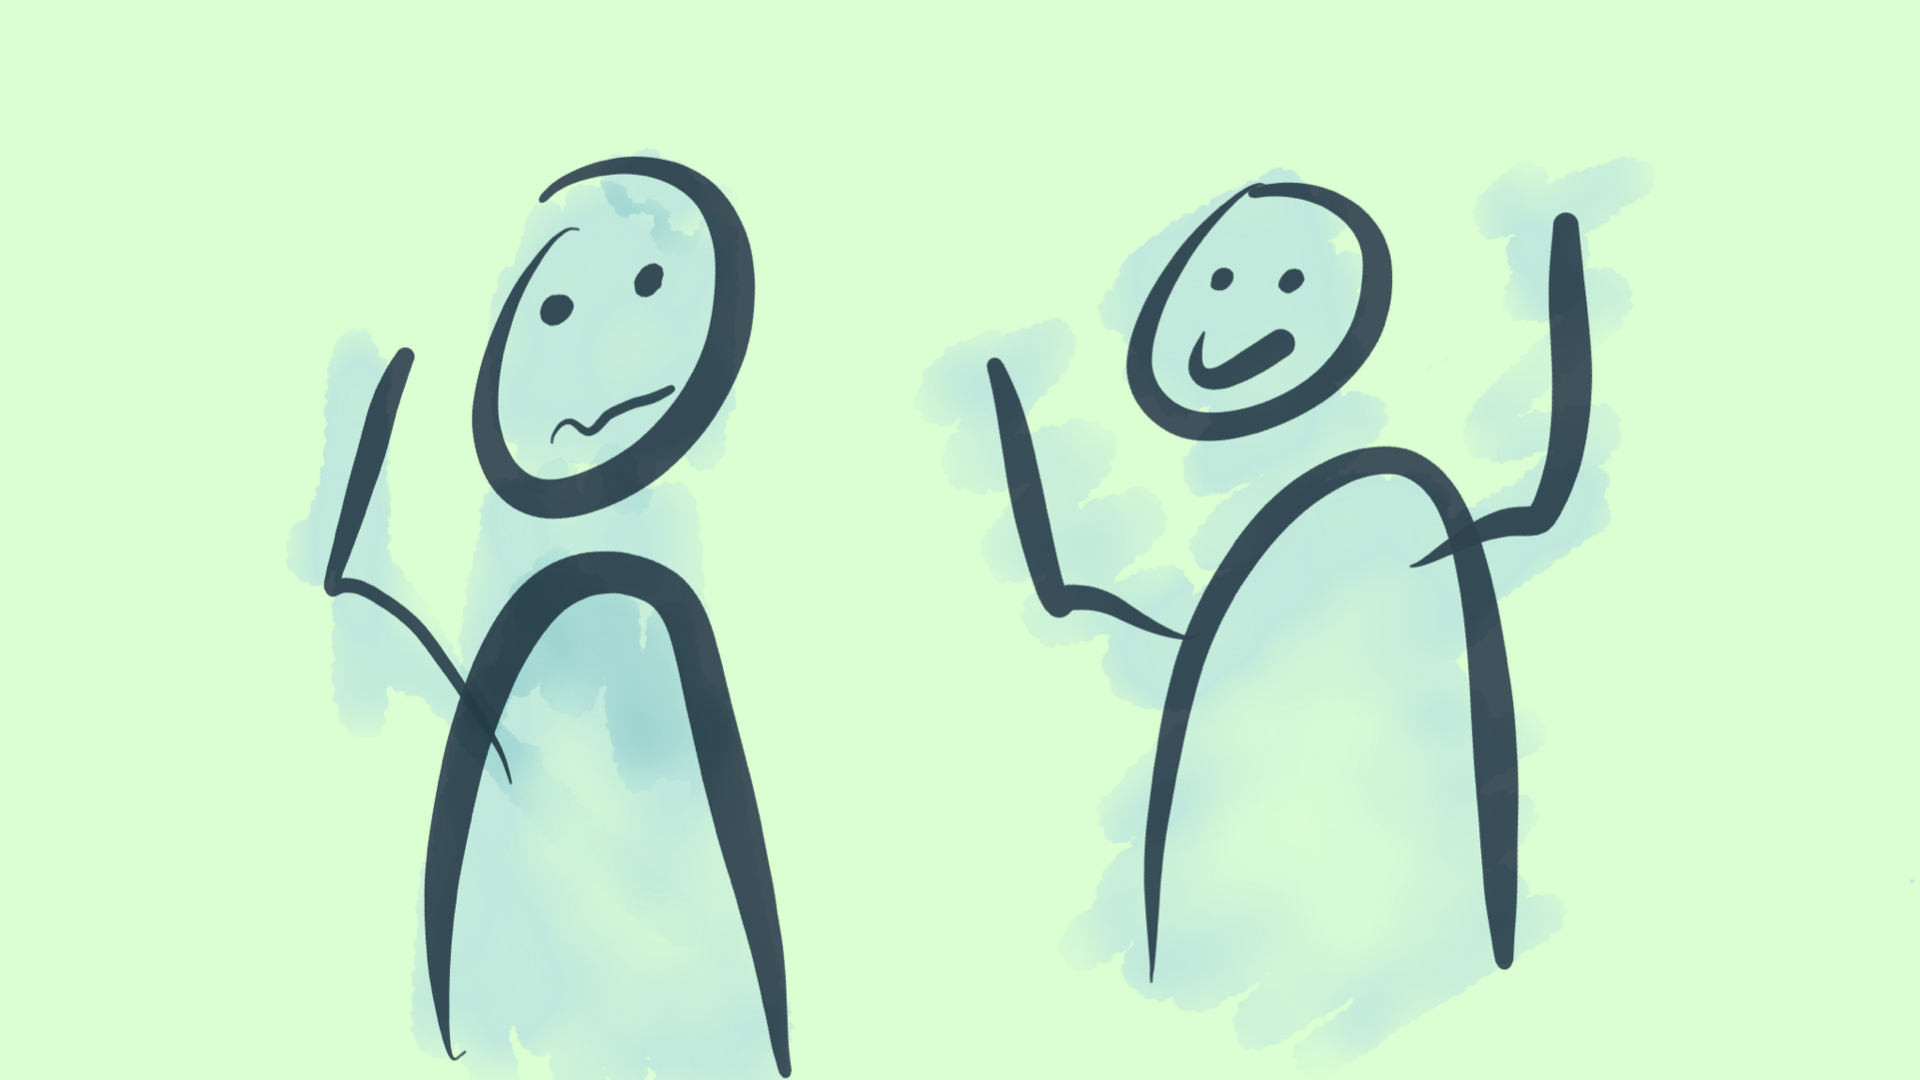 Illustration of two people in conversation. The person on the left looks confused.